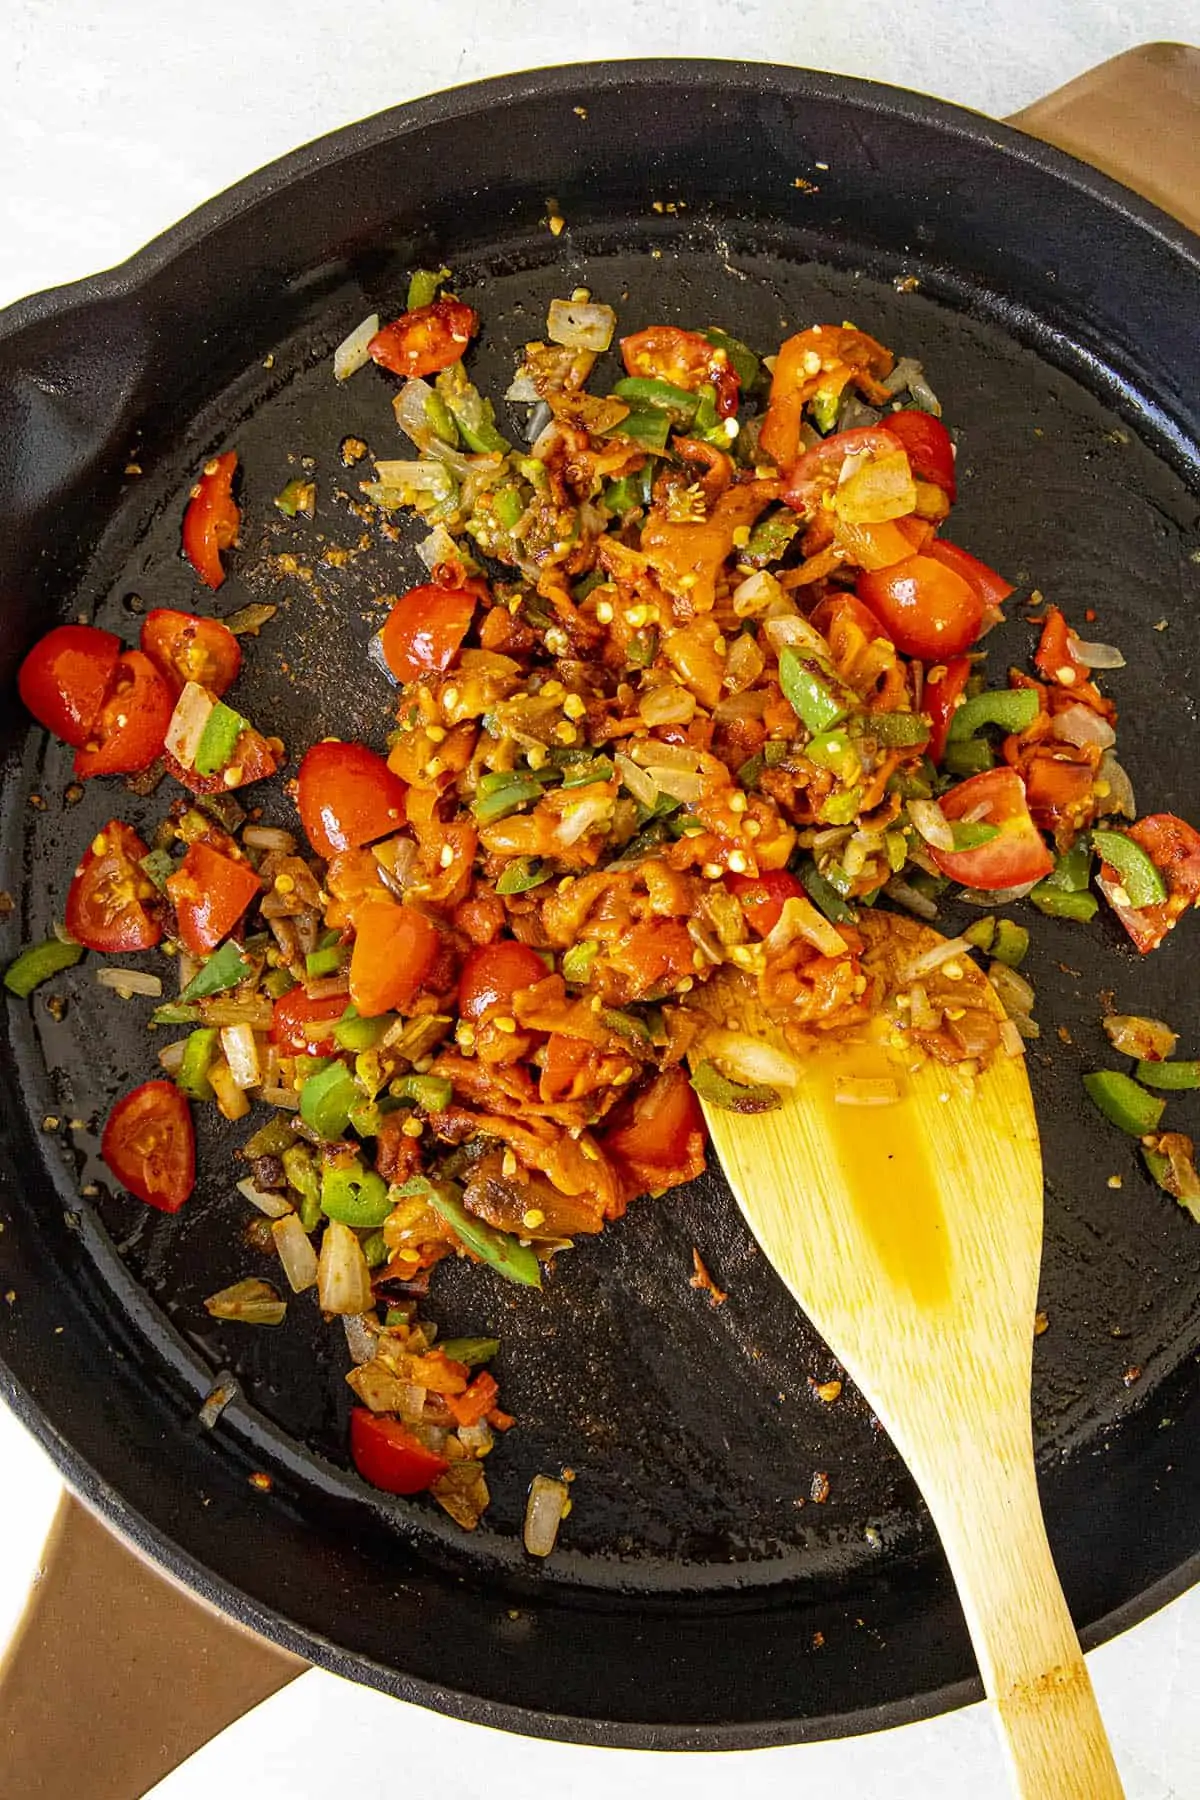 Cooking peppers, onions and tomatoes in a hot pan.